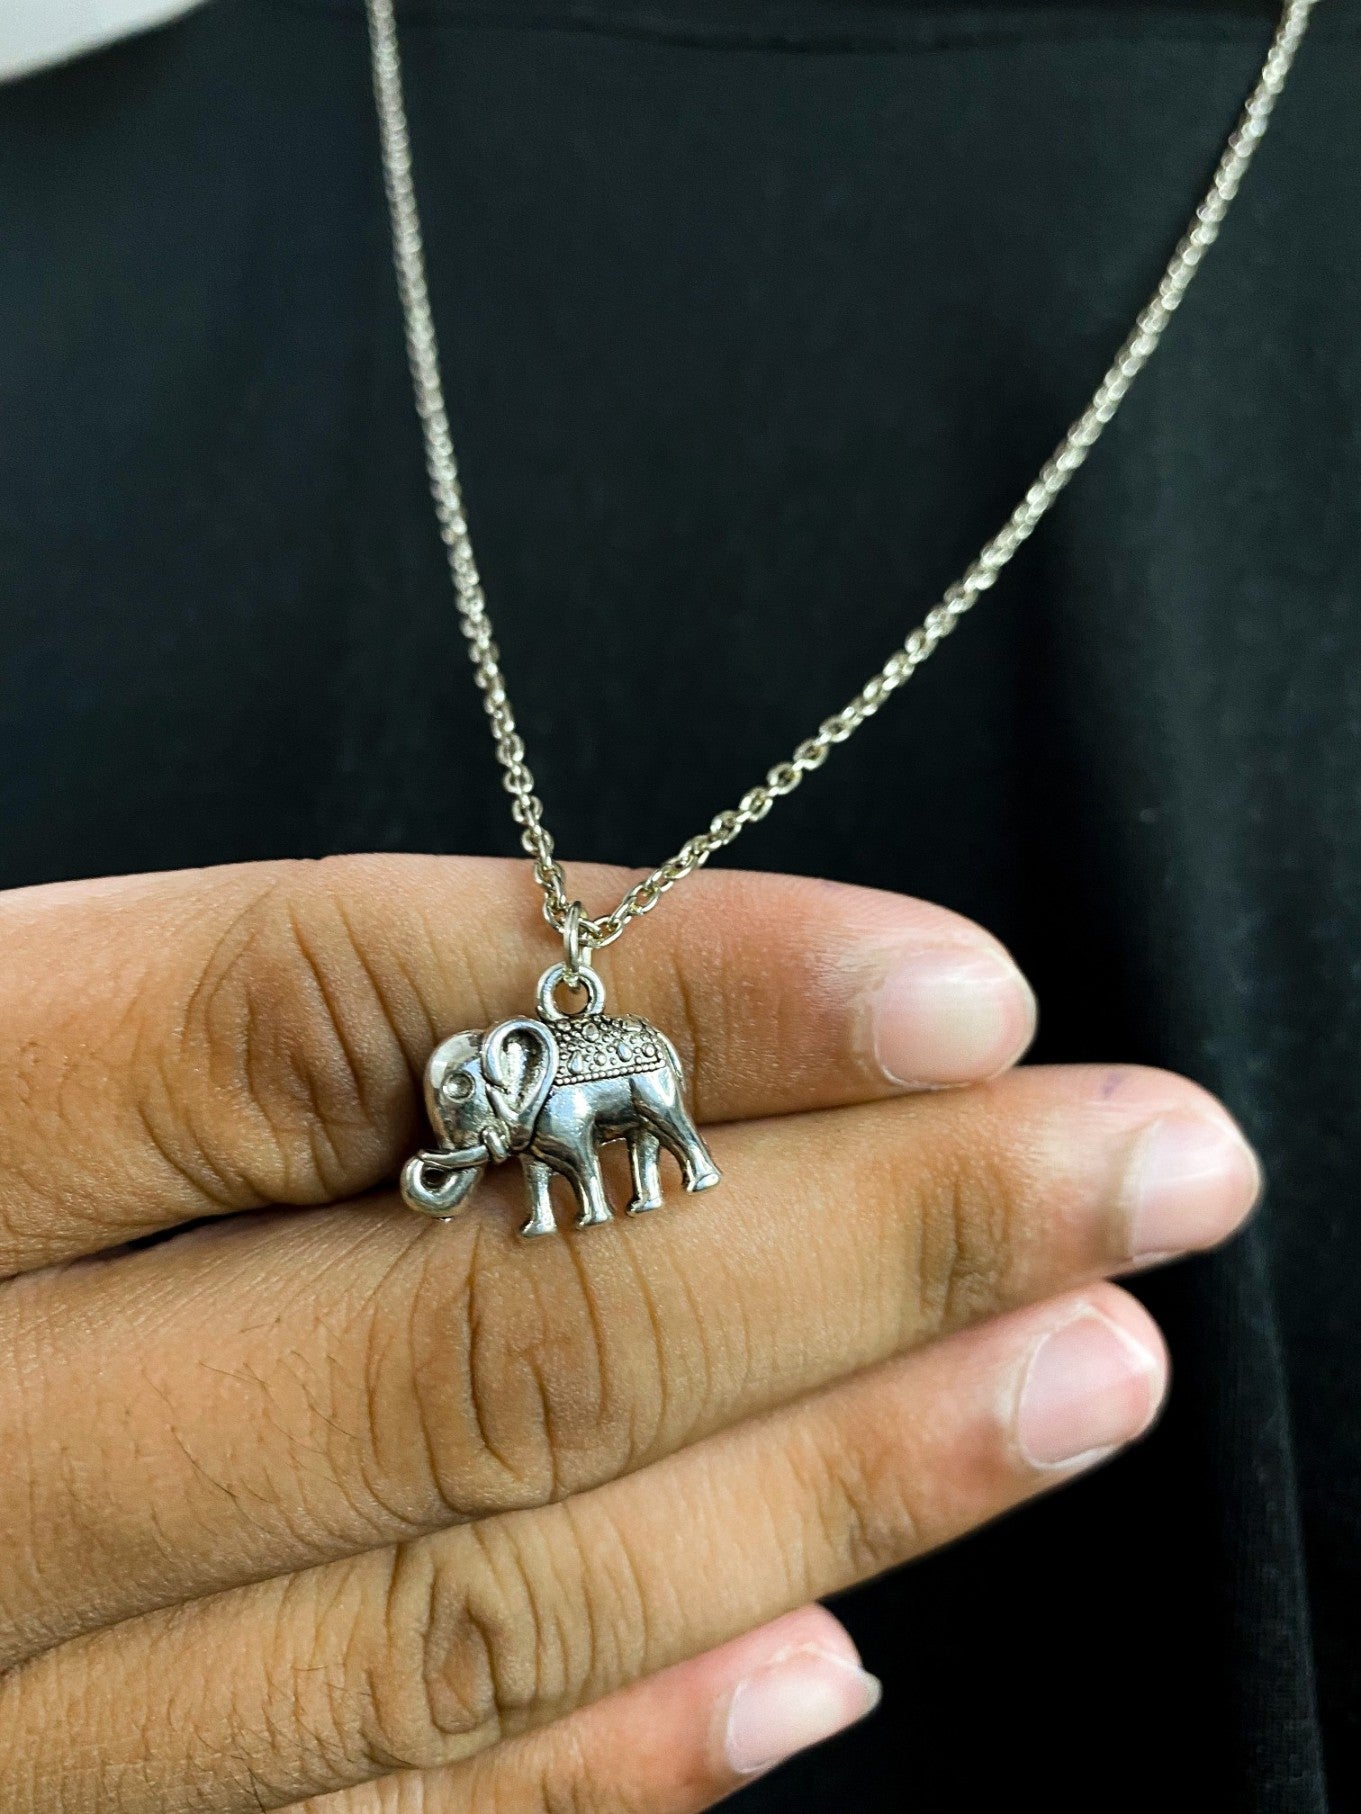 Big Silver Engraved Elephant Pendant Pendant With Chain